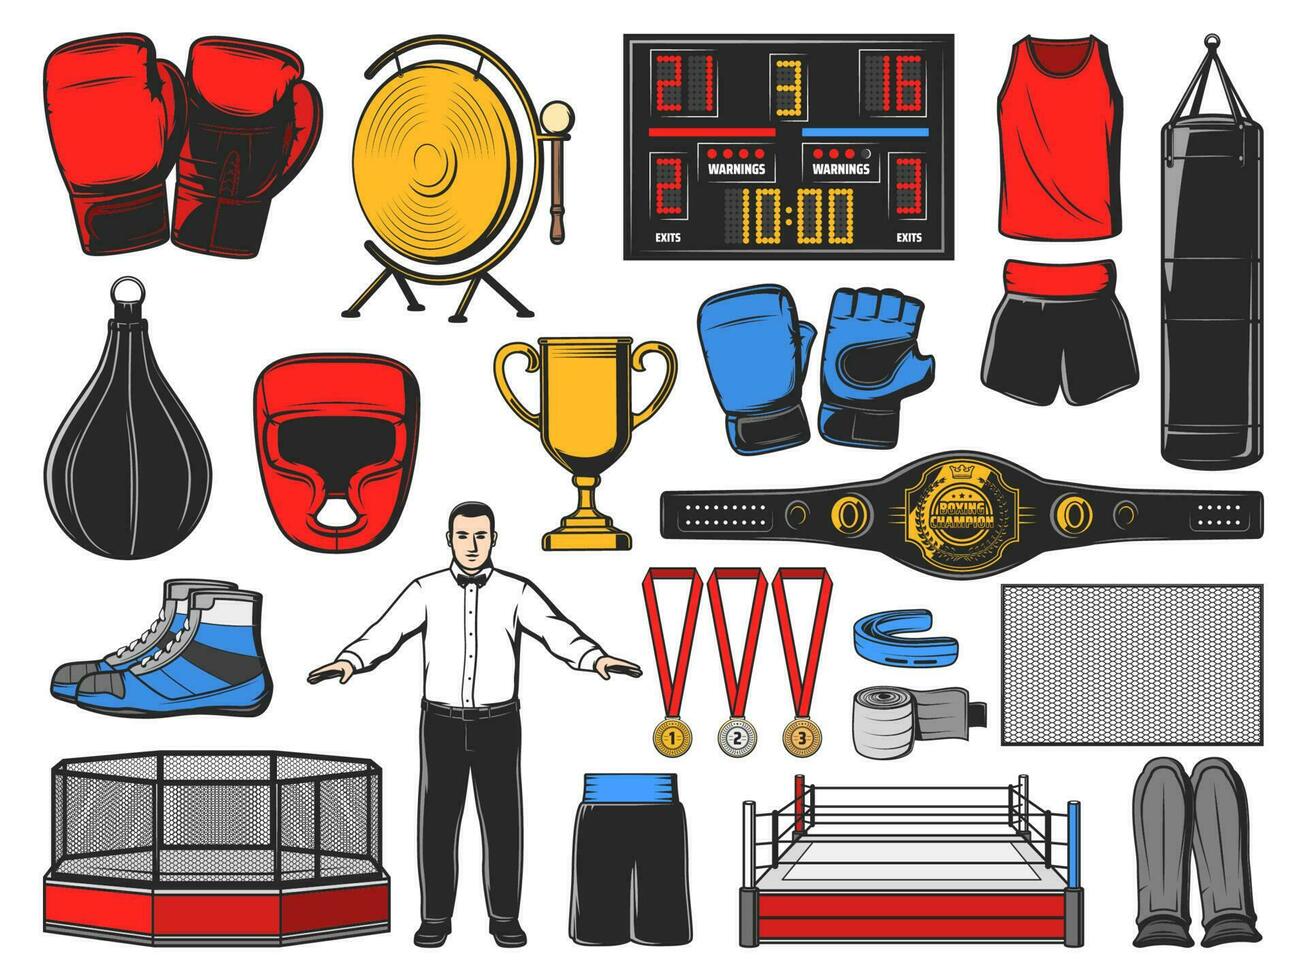 Boxing icons of kickboxing or MMA fight equipment vector